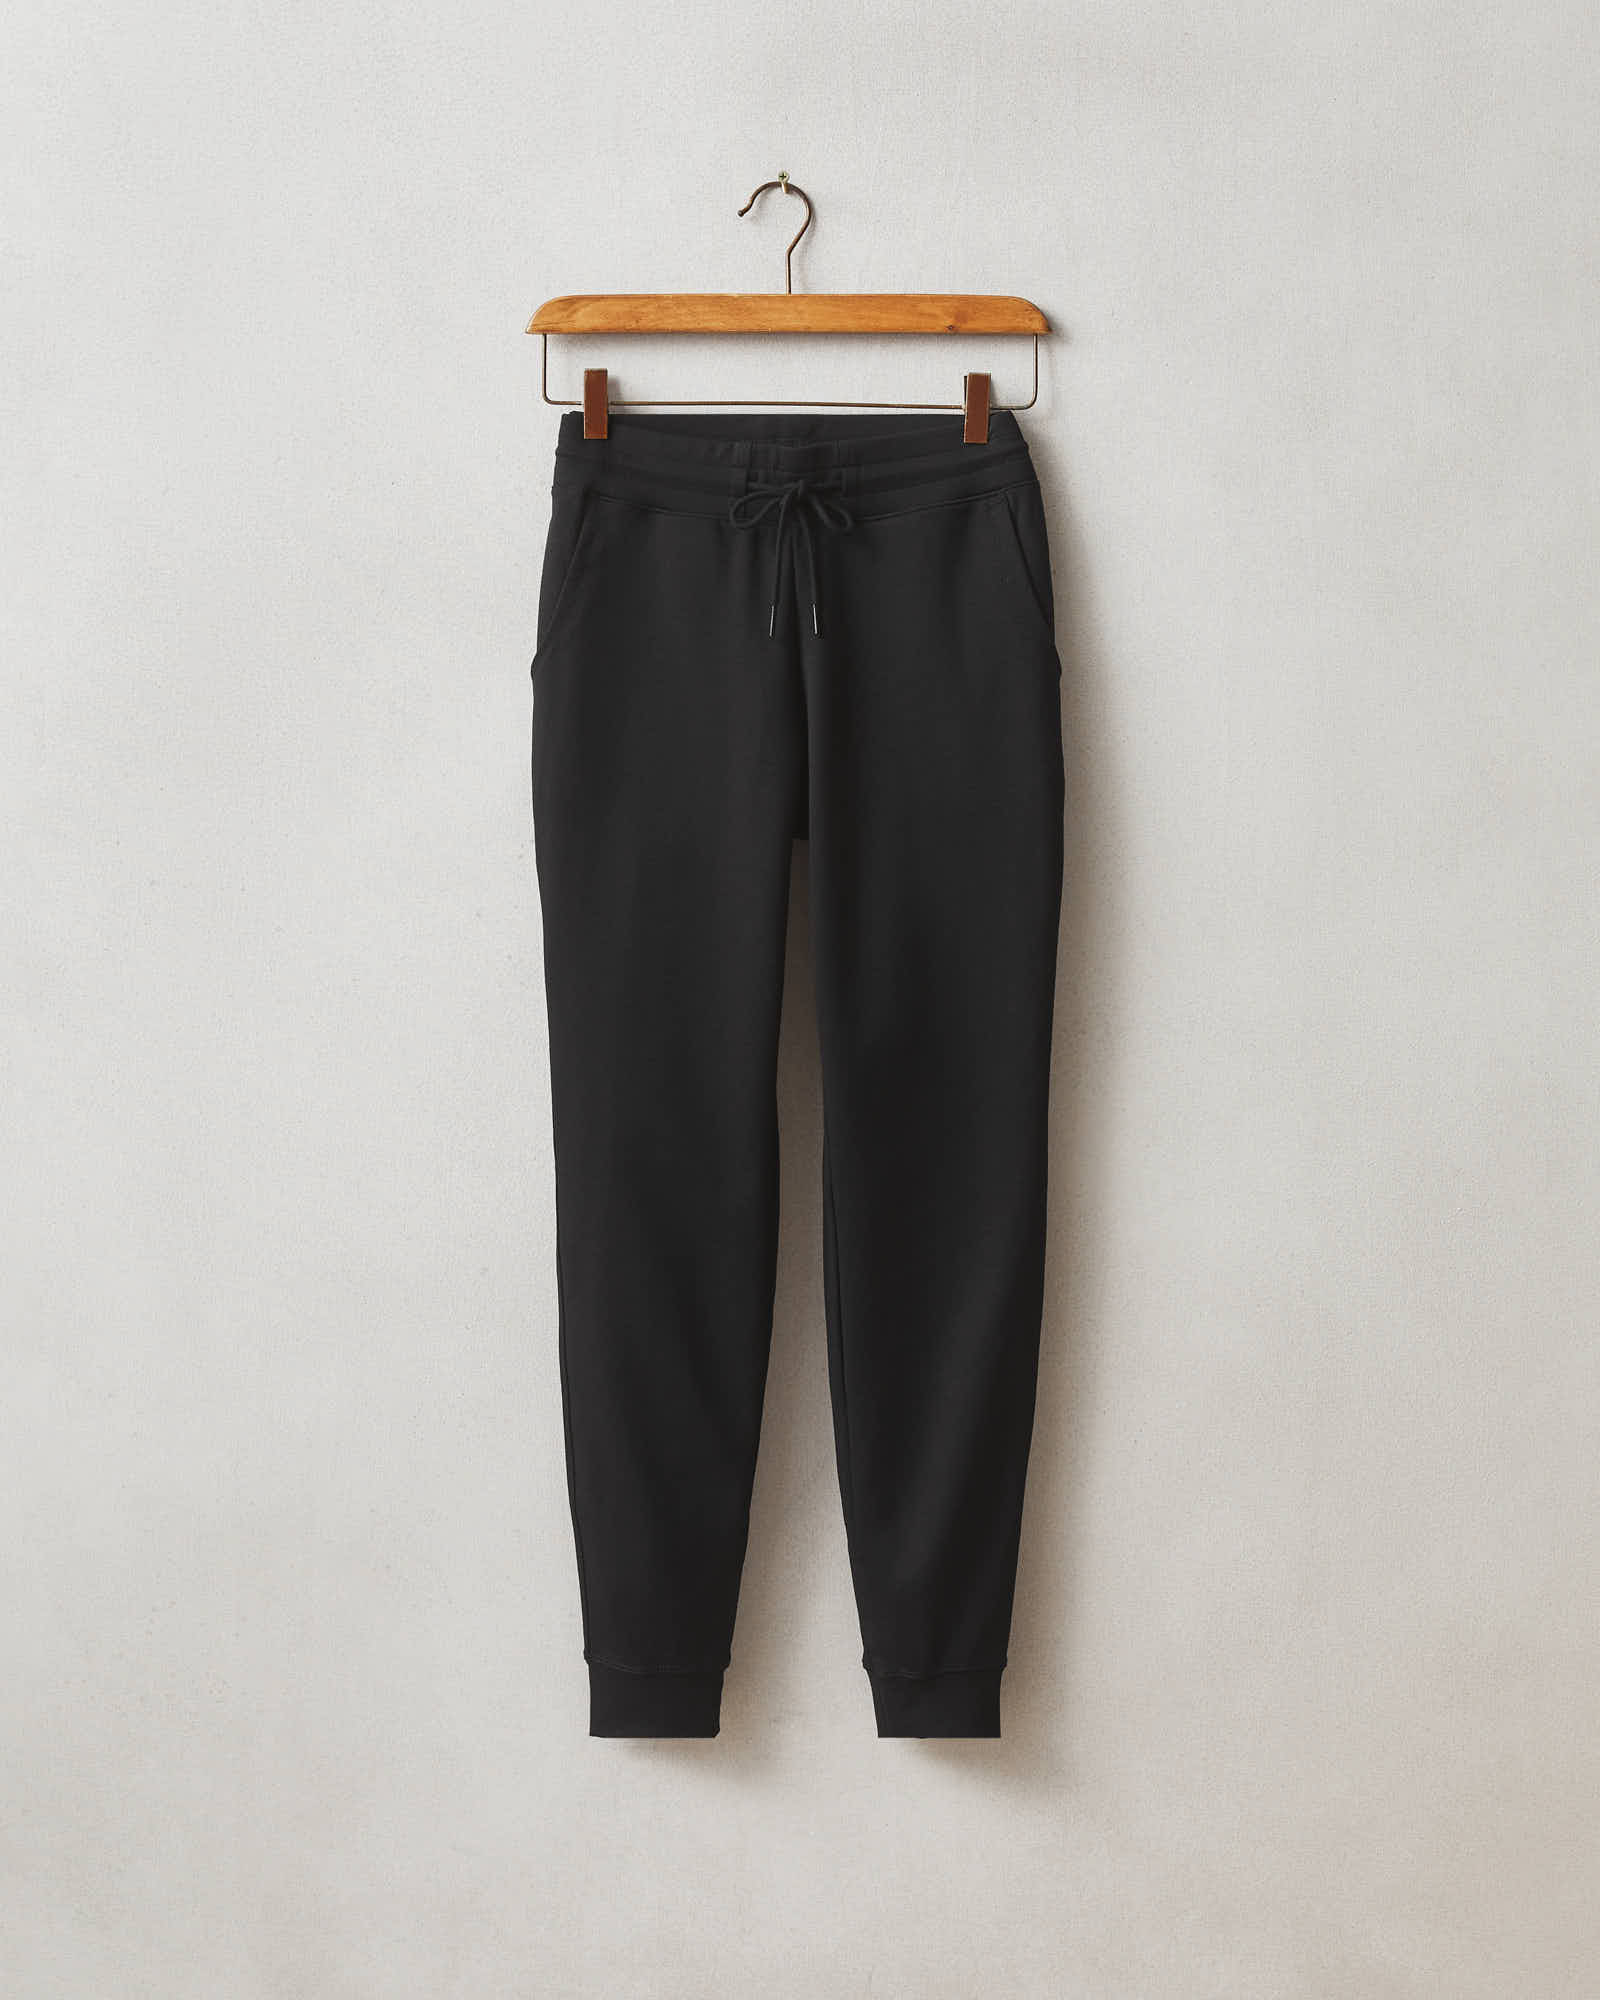 Downtown Women's Tapered Sweatpants